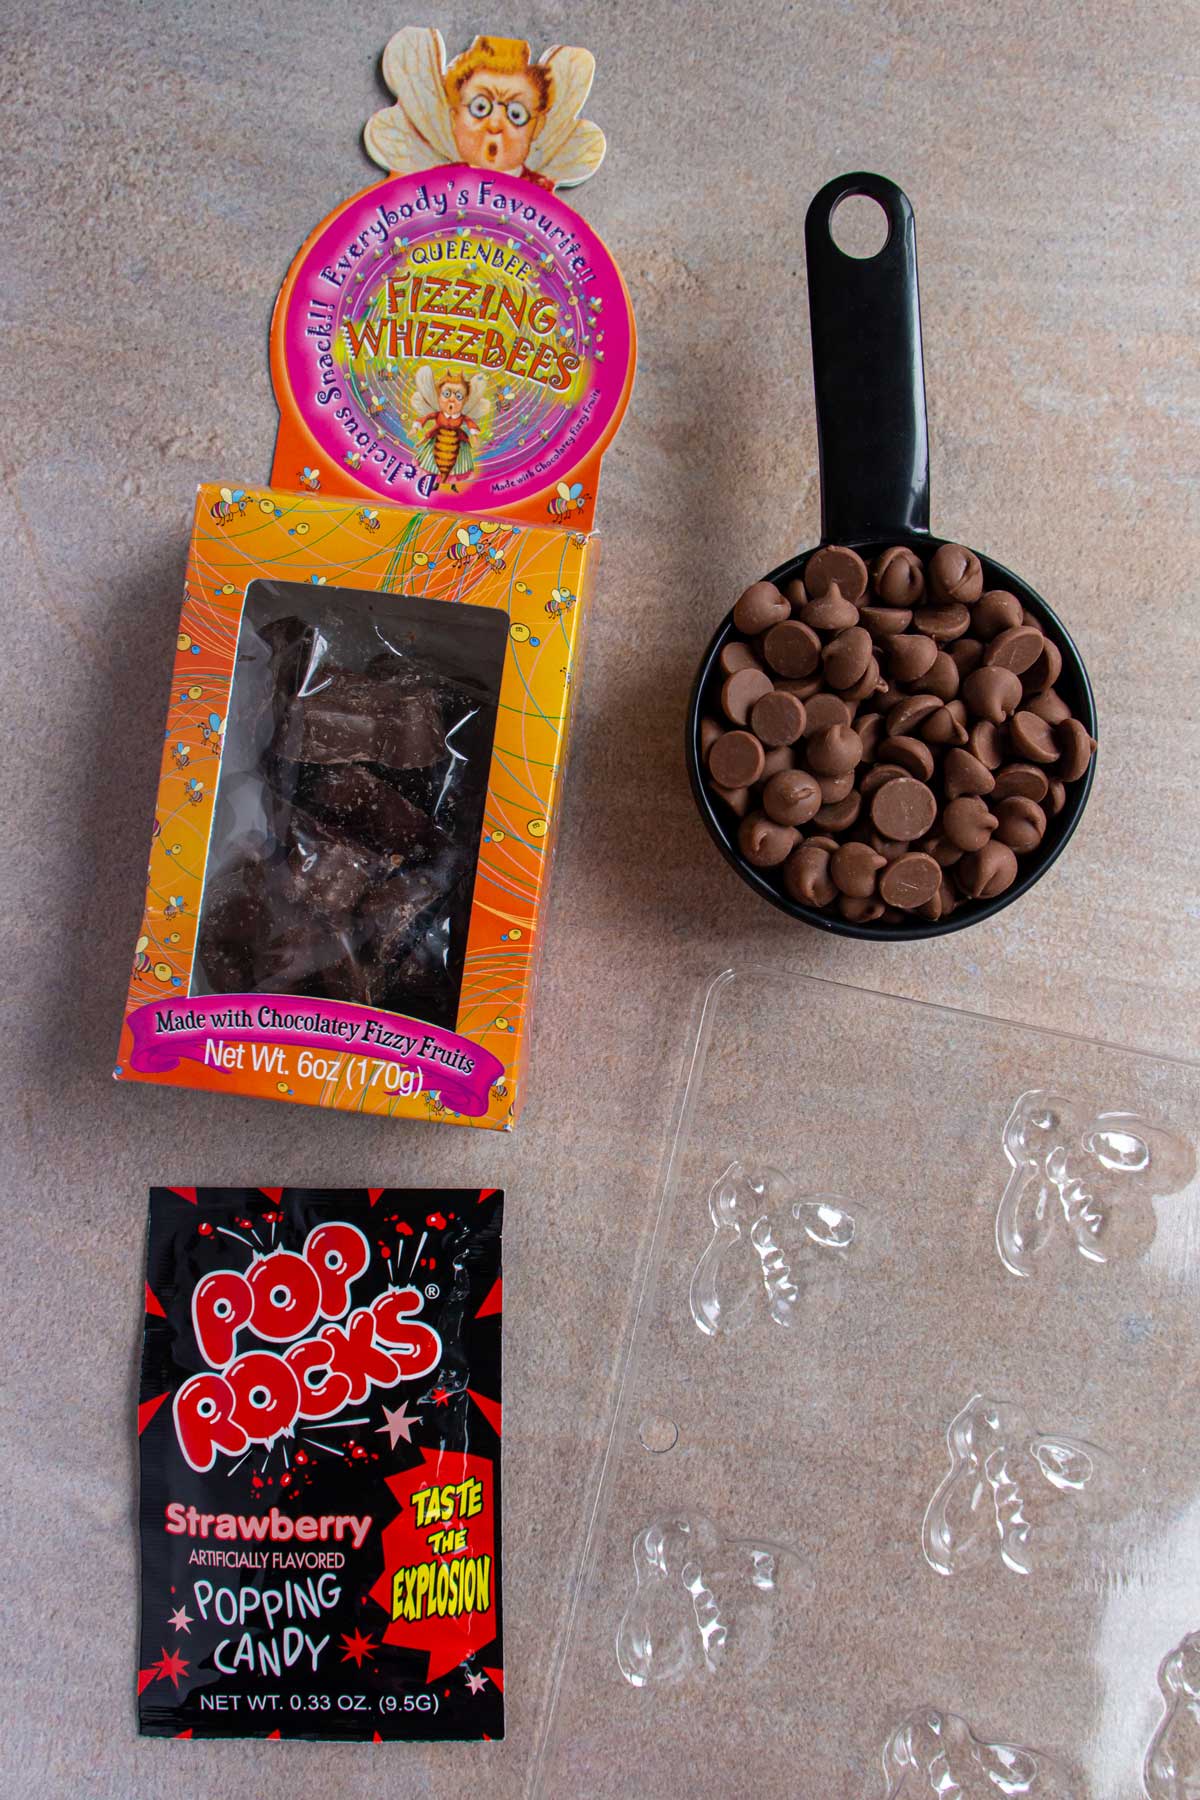 A box of Fizzing Whizzbees candy, chocolate chips, Pop Rocks, and a plastic bee candy mold.